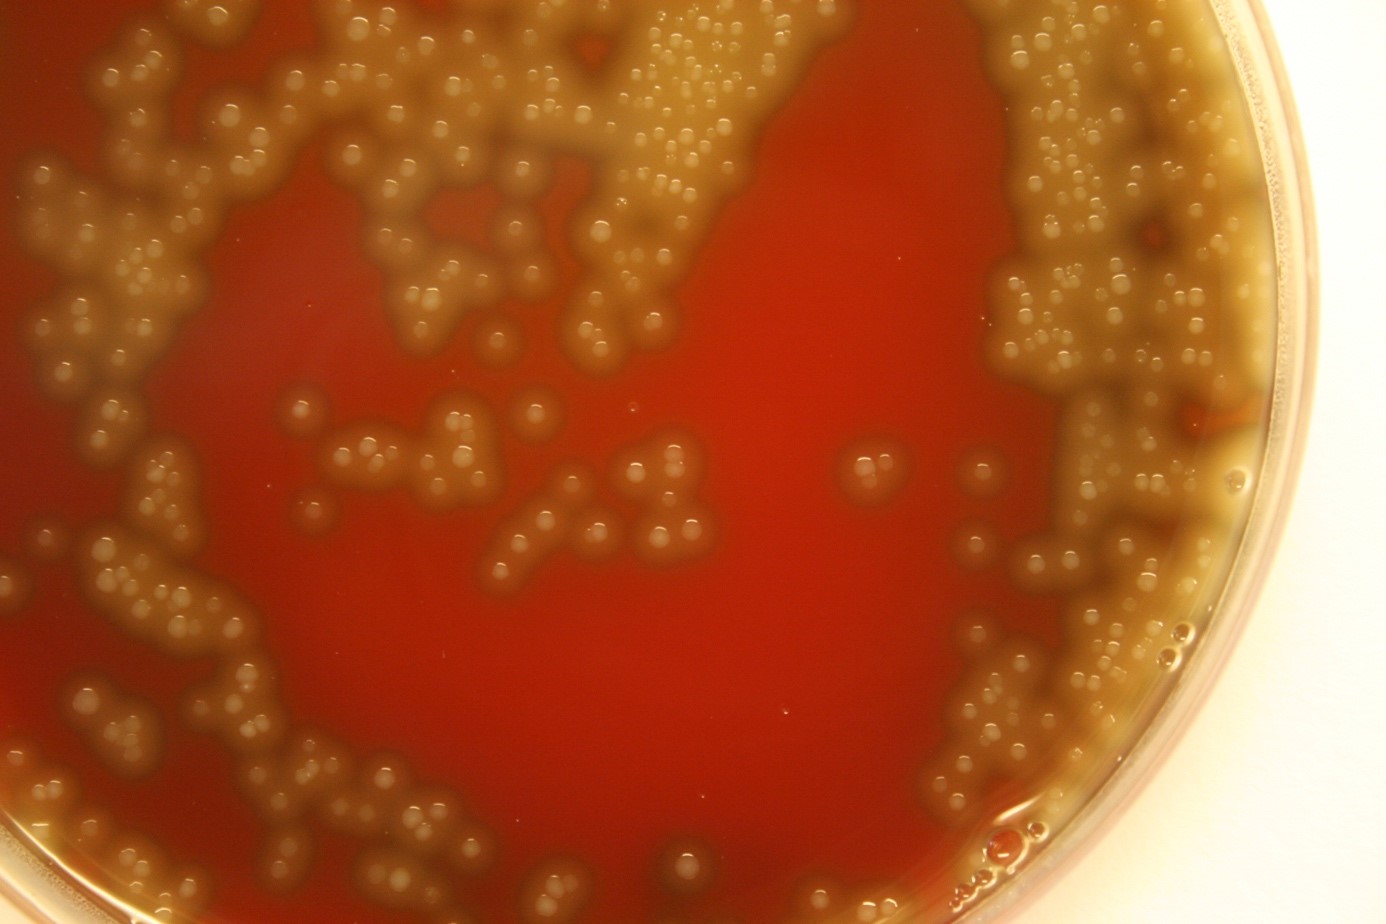 Streptococcus pneumoniae growing in petri dishes in the laboratory.